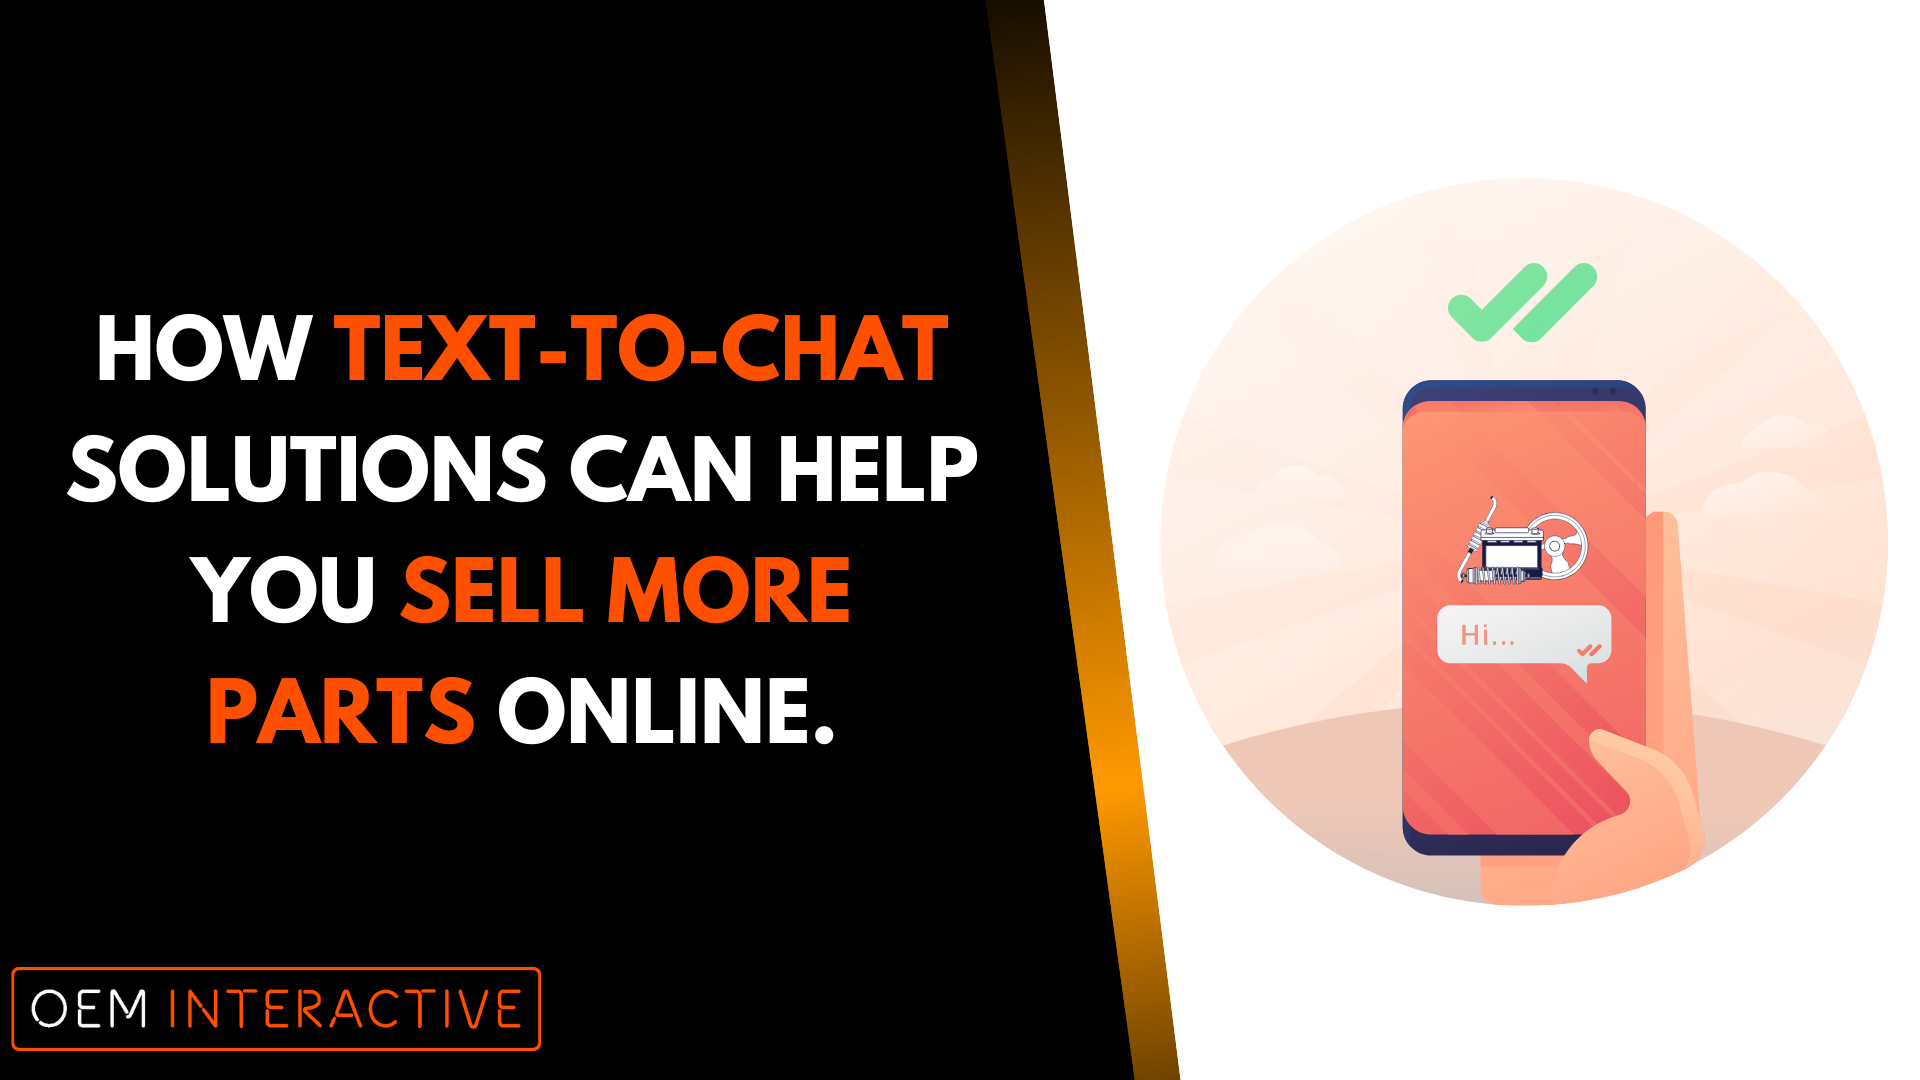 How Text-to-Chat Solutions Can Help You Sell More Parts Online-Featured Image